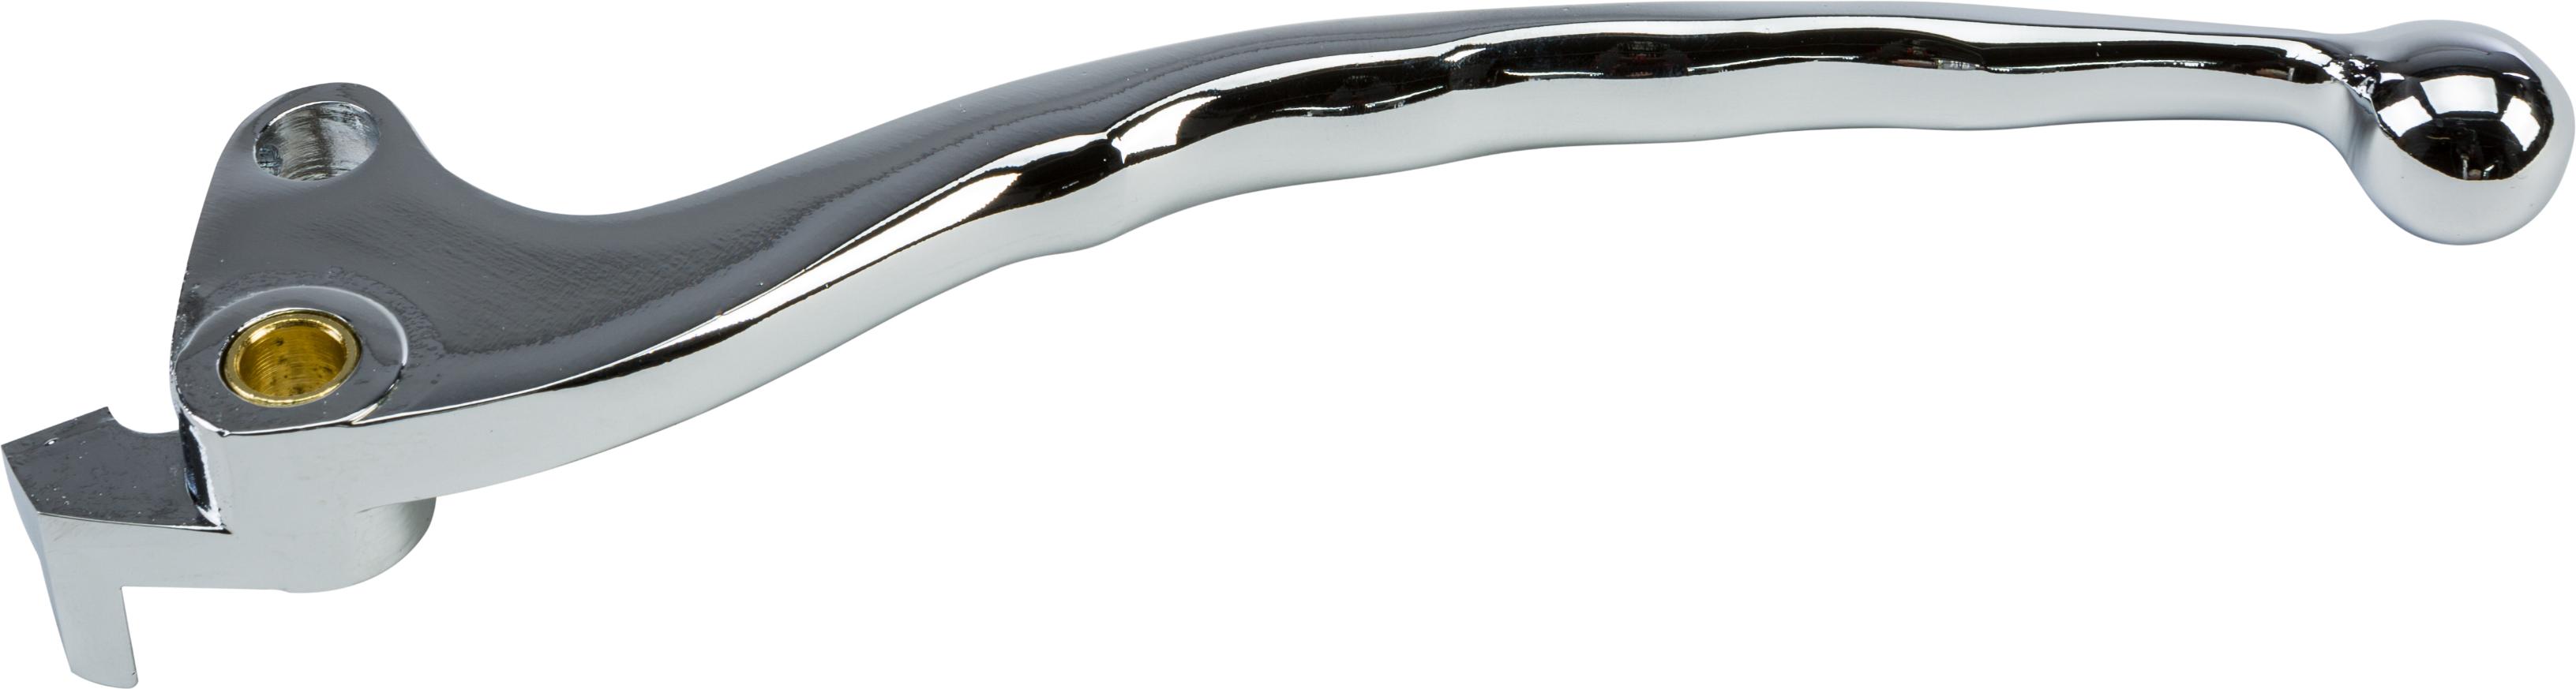 Fire Power - Clutch Lever Silver - WP99-71682